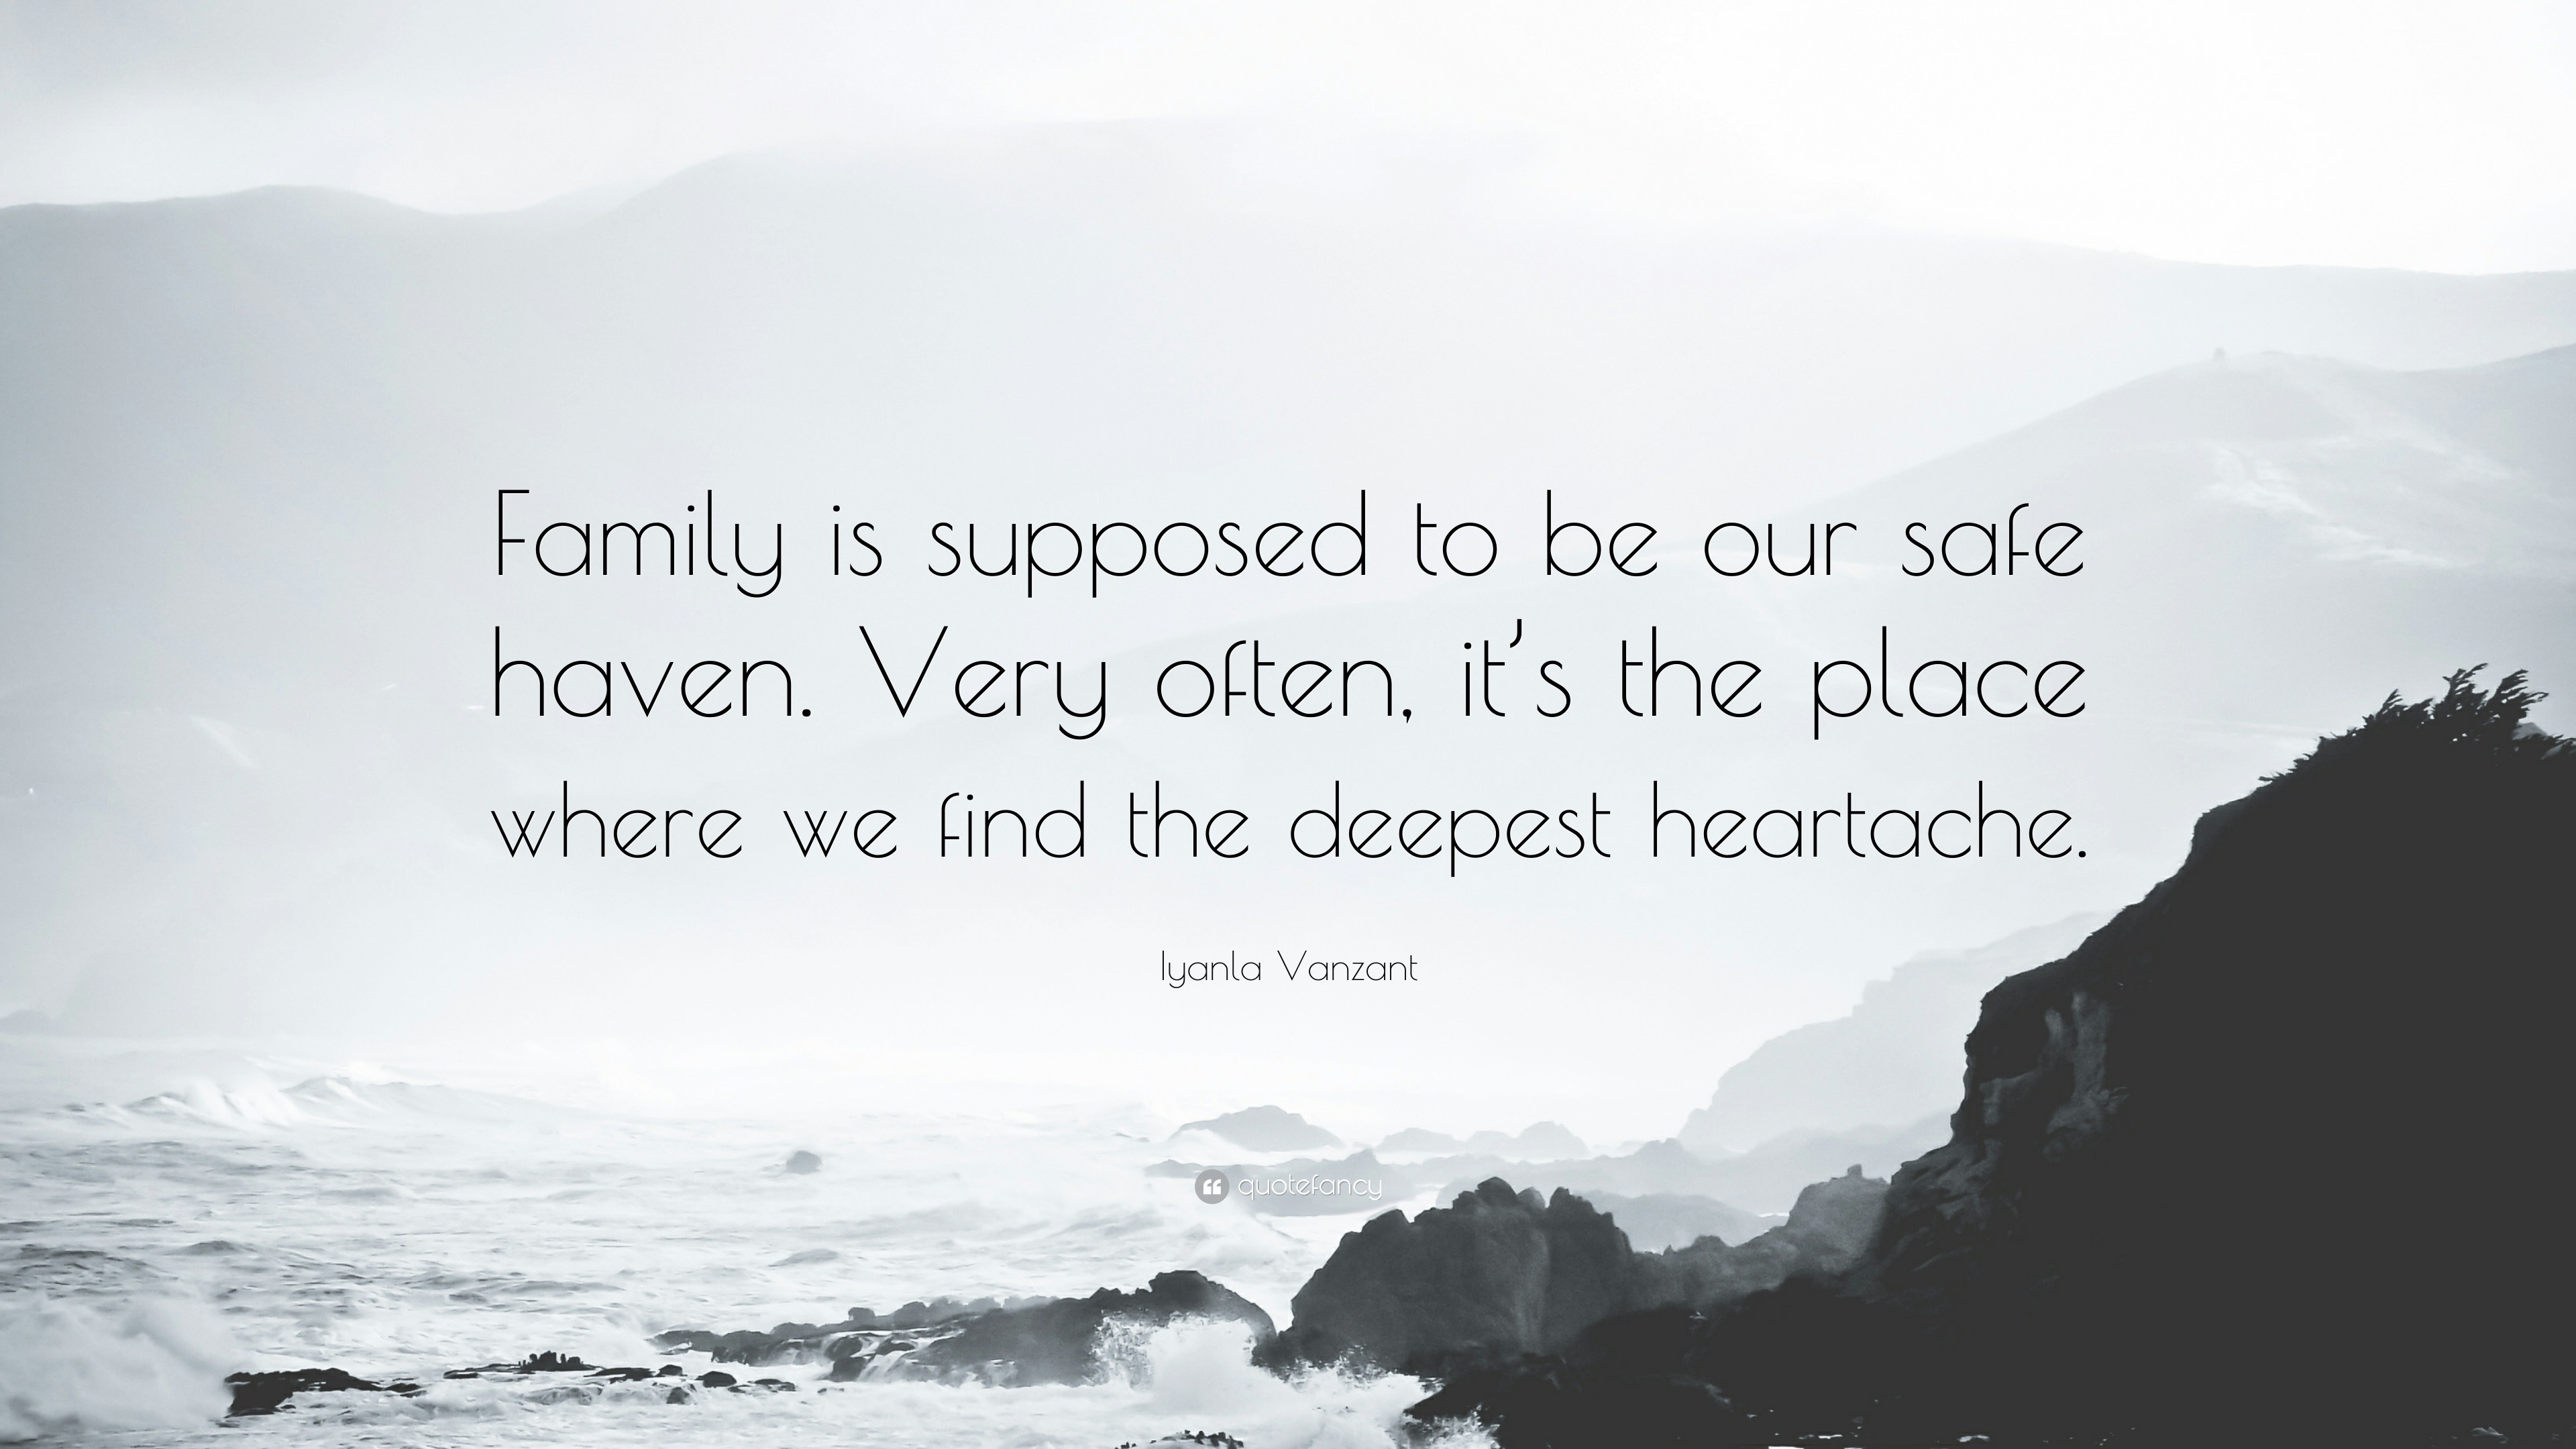 Iyanla Vanzant Quote: “Family Is Supposed To Be Our Safe Haven. Very Often, It's The Place